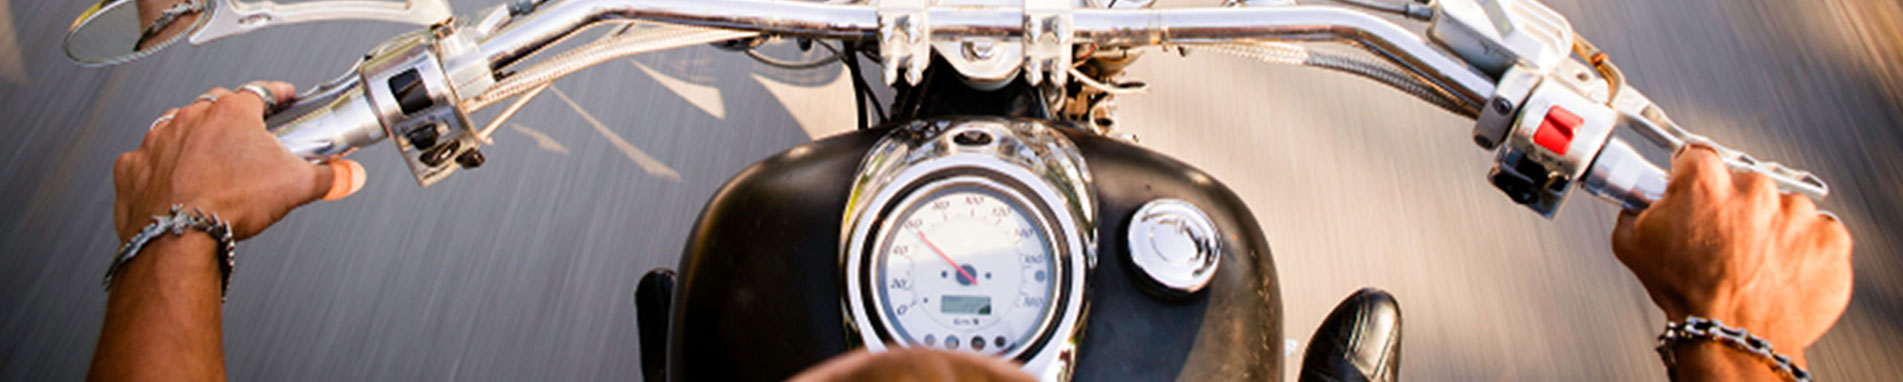 Texas Motorcycle Insurance coverage